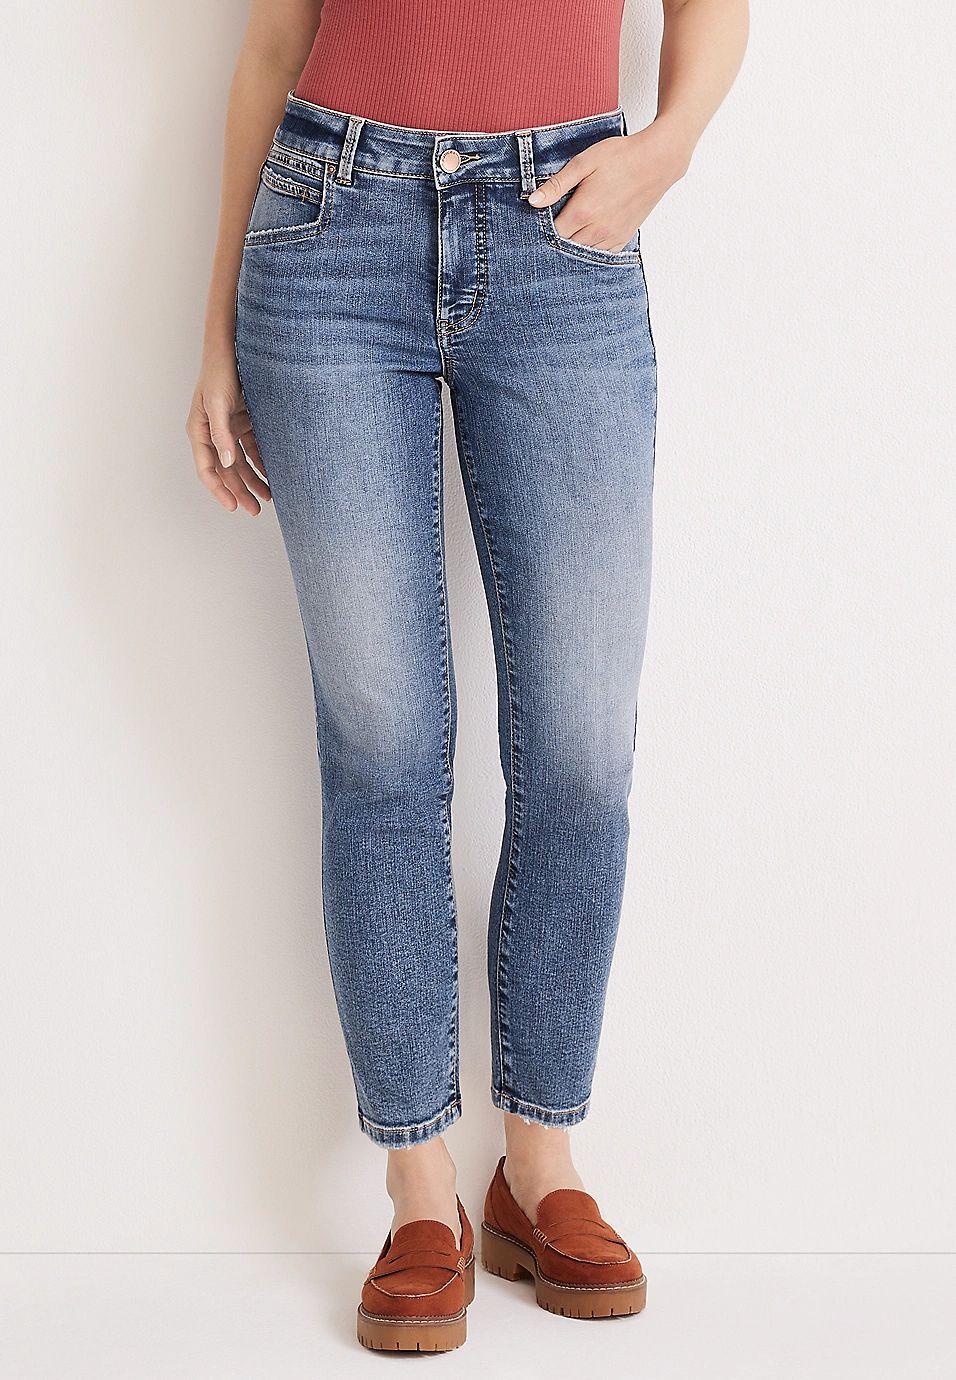 m jeans by maurices™ Everflex™ Slim Straight High Rise Ankle Jean | Maurices